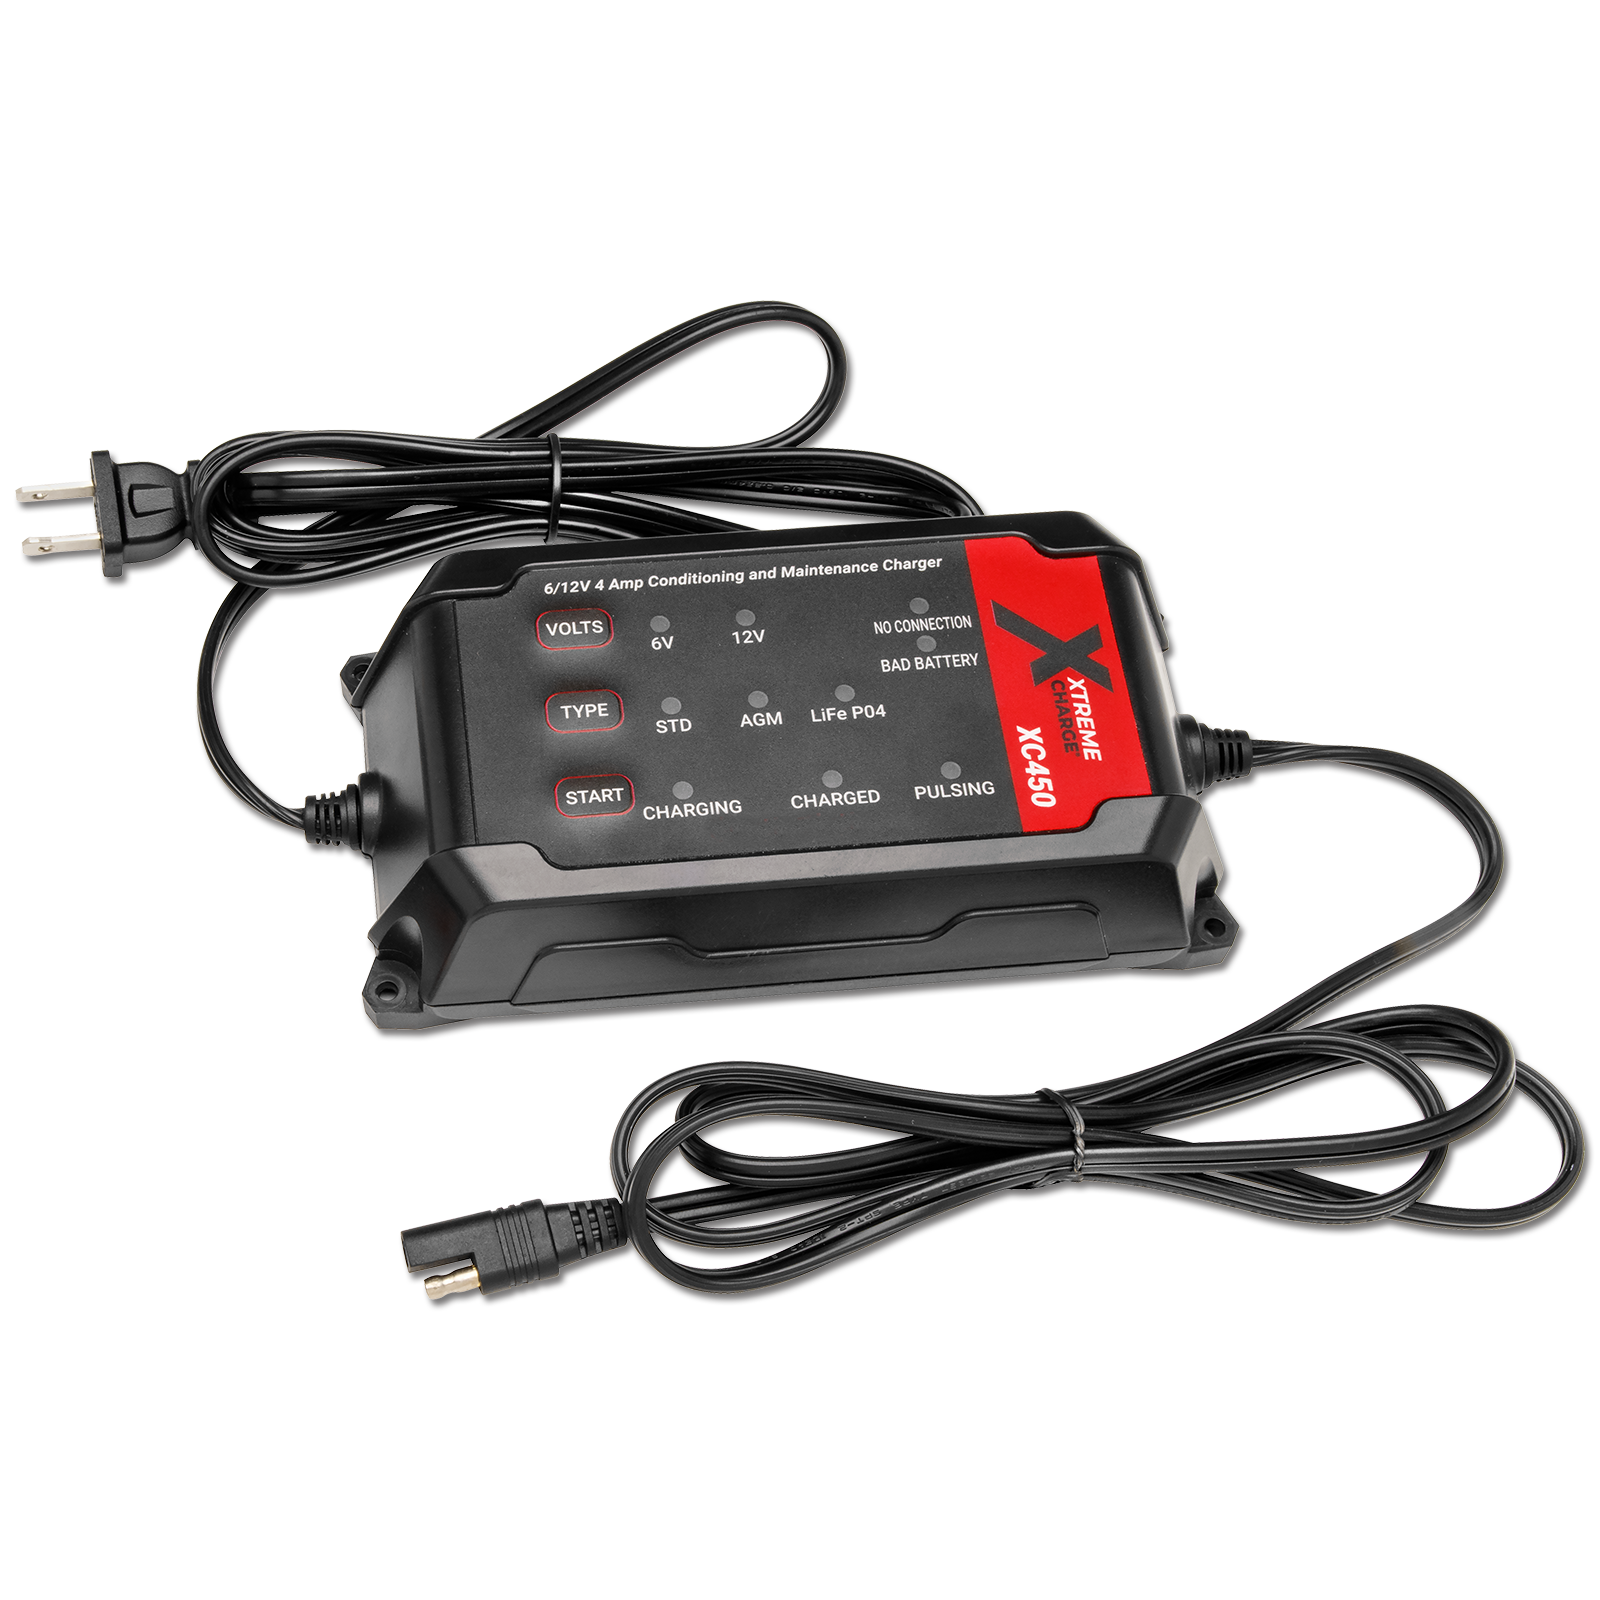 Xtreme Charge XC450 Battery Charger, Maintainer and Conditioner